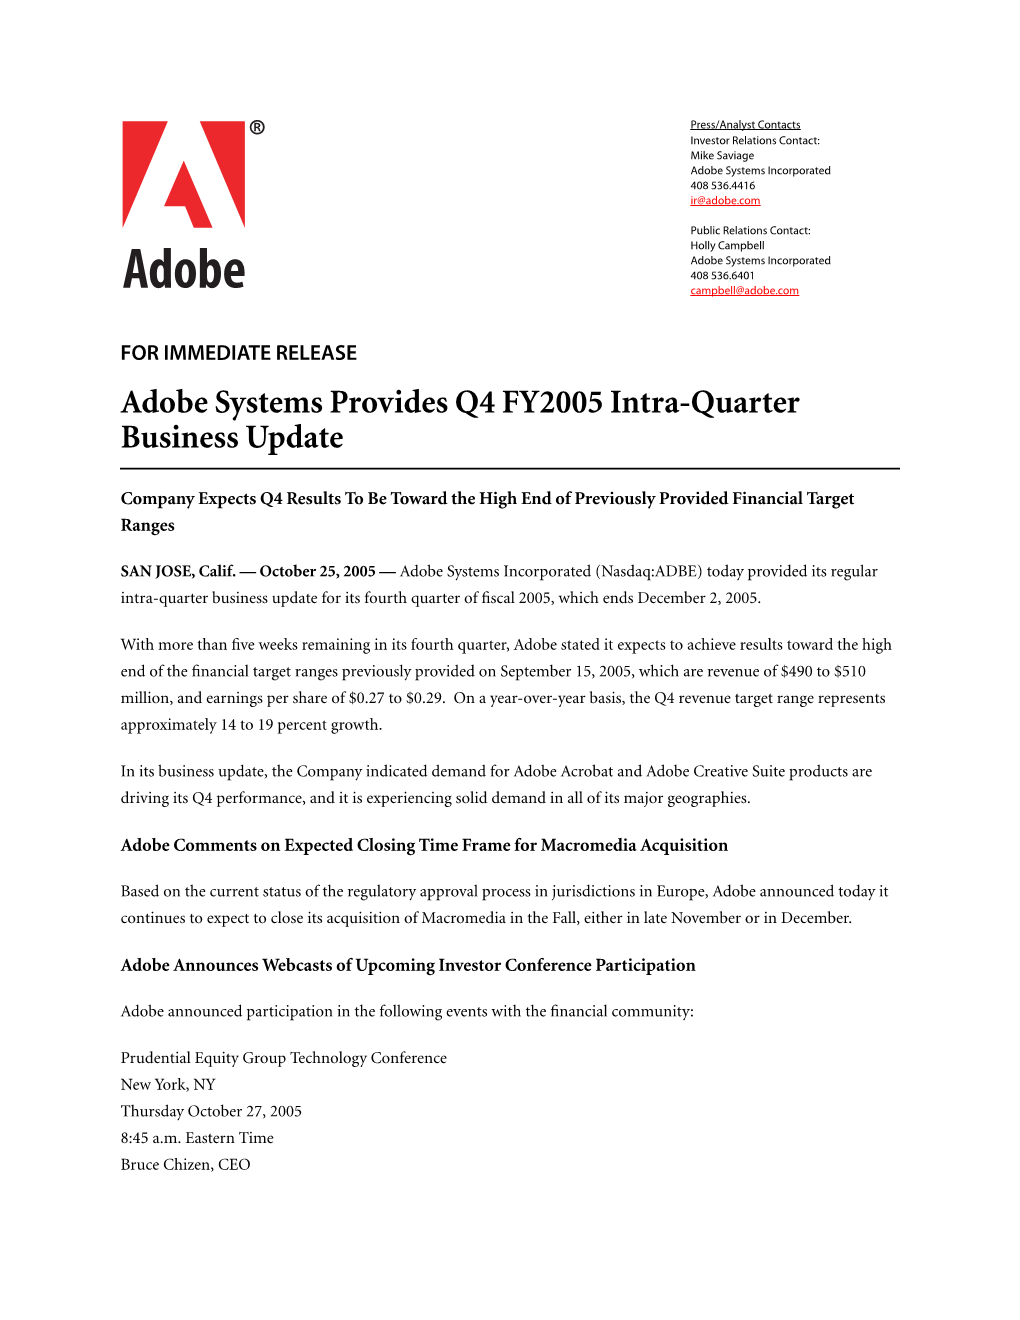 Adobe Systems Provides Q4 FY2005 Intra-Quarter Business Update